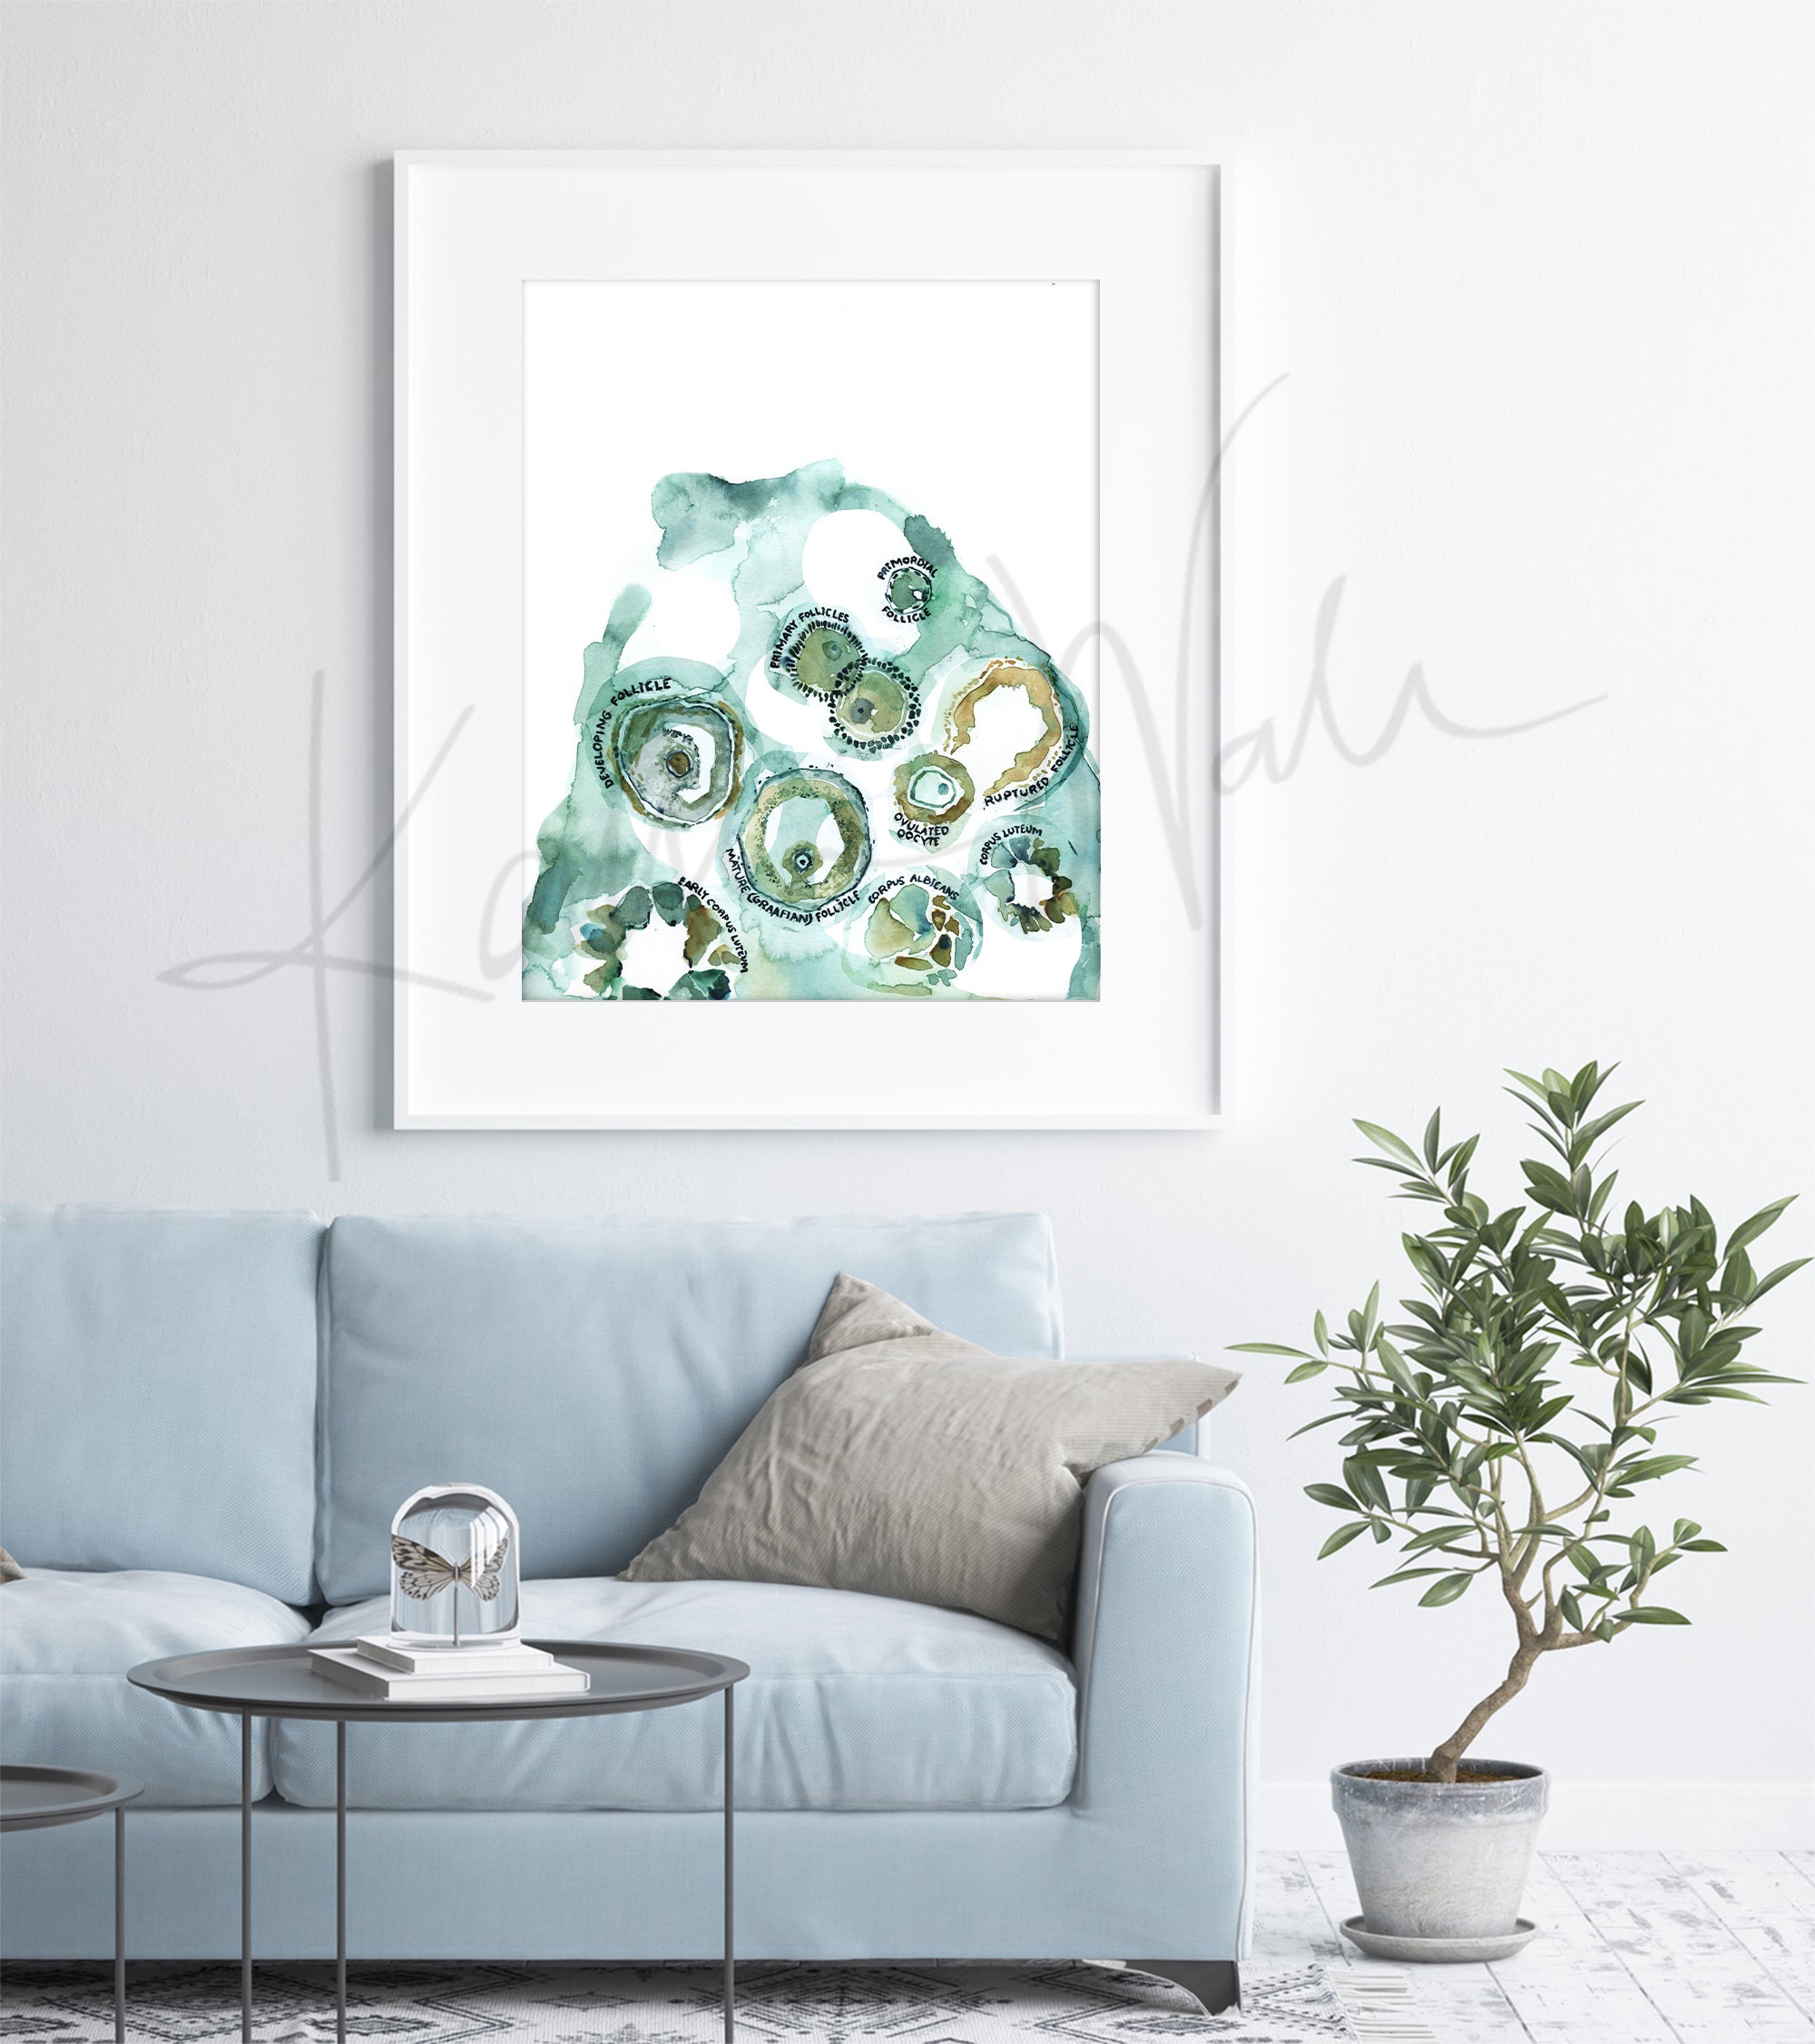 Framed watercolor painting of an ovulation cycle. The painting is hanging over a blue couch.